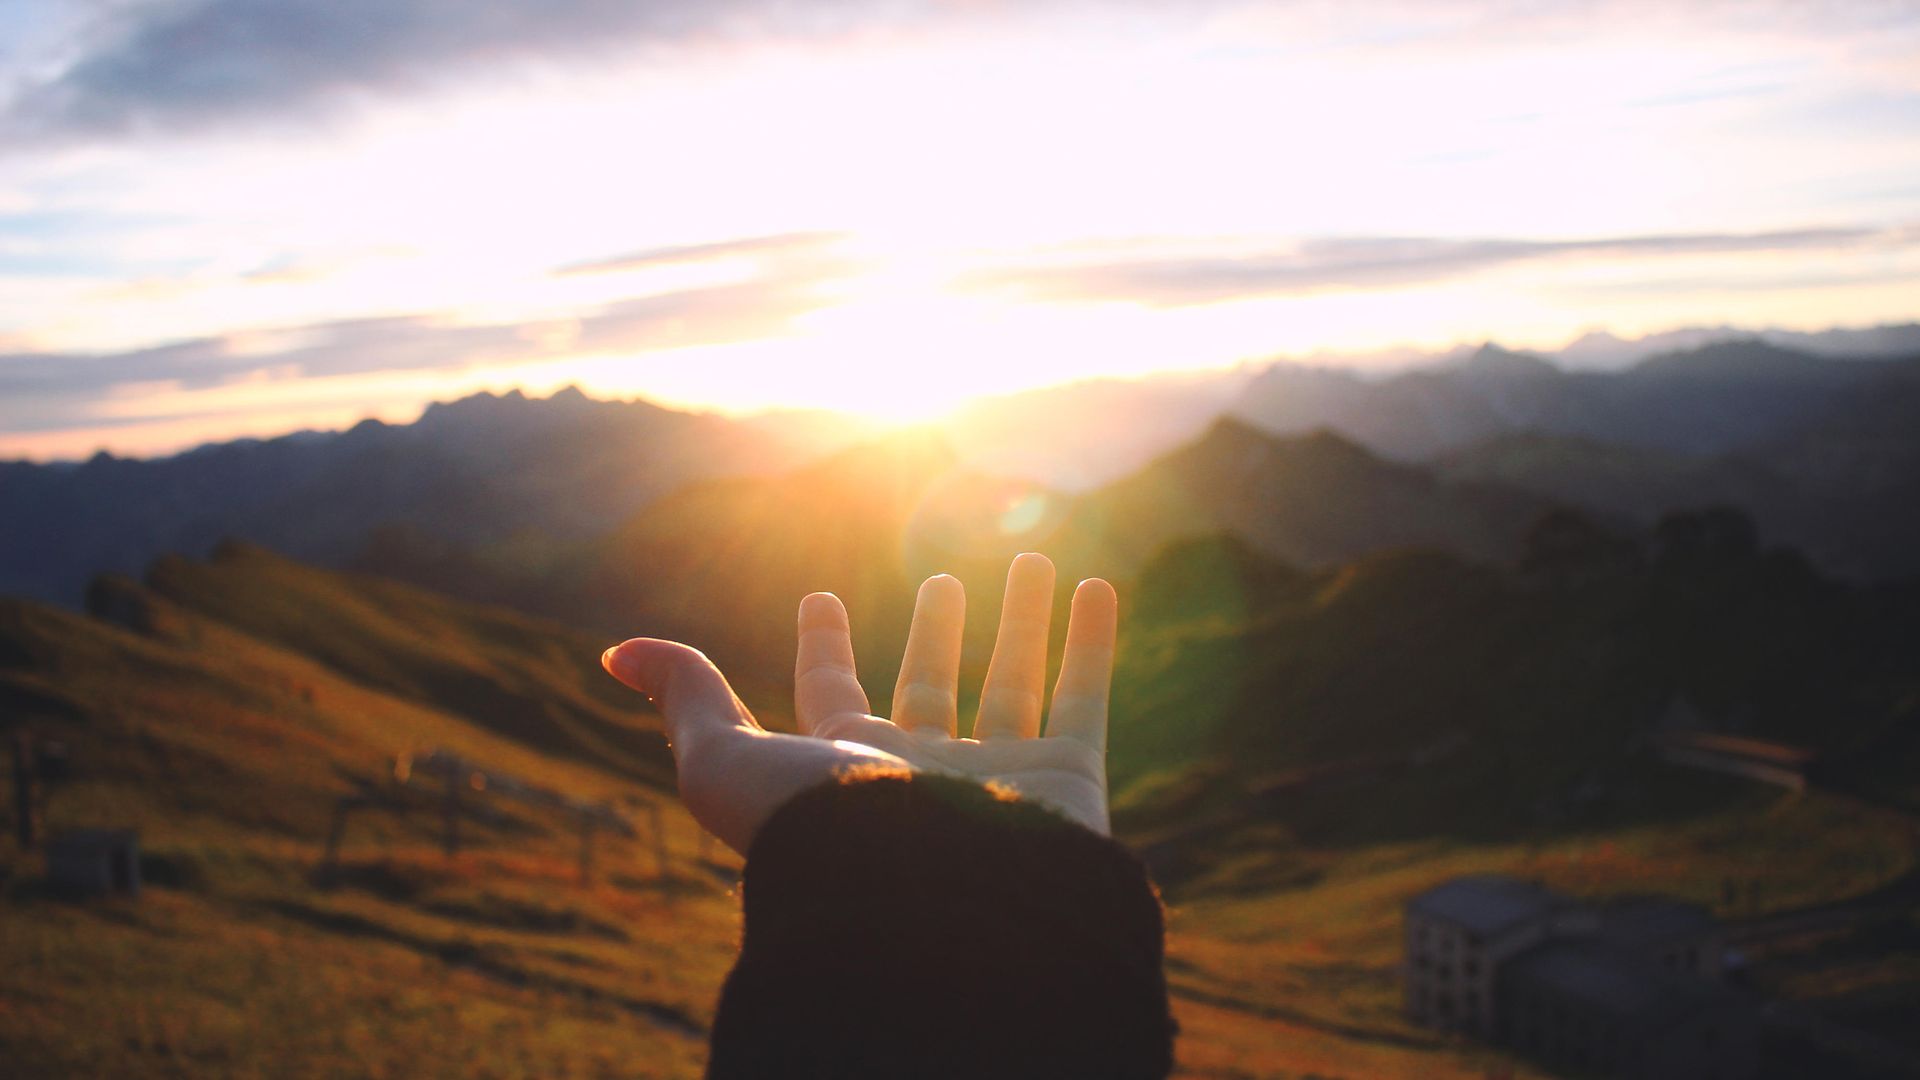 Hand reaching out towards the sunrise